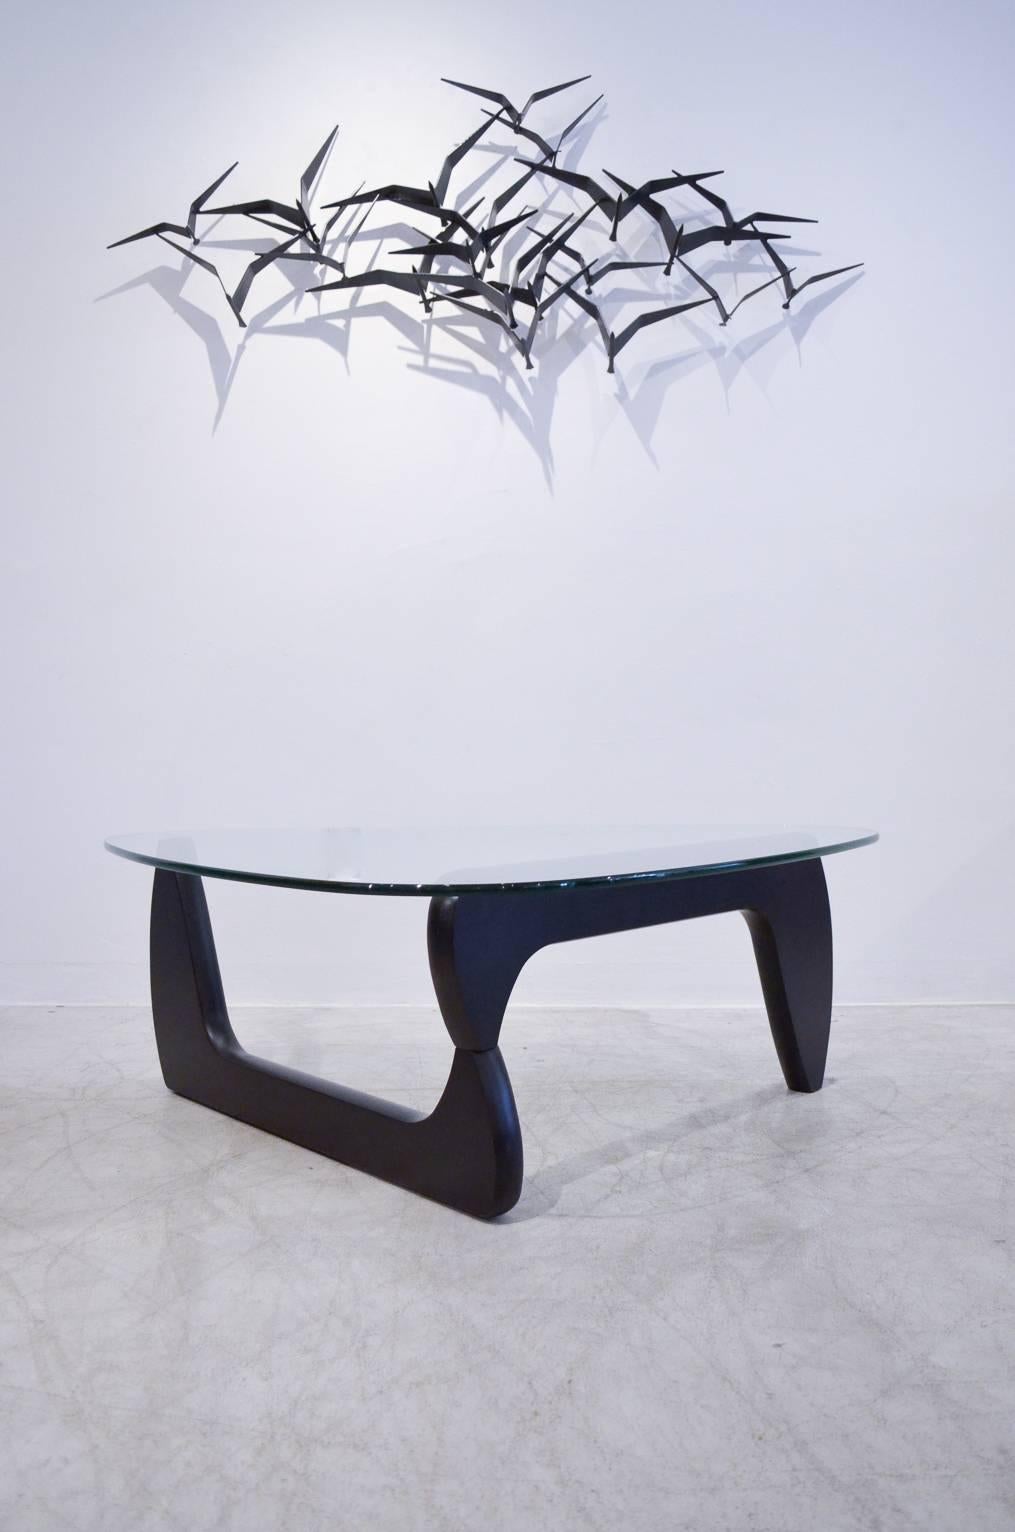 Beautiful sculptural glass and ebony wood coffee table by Isamu Noguchi for Knoll.

Glass is excellent with no chips or scratches